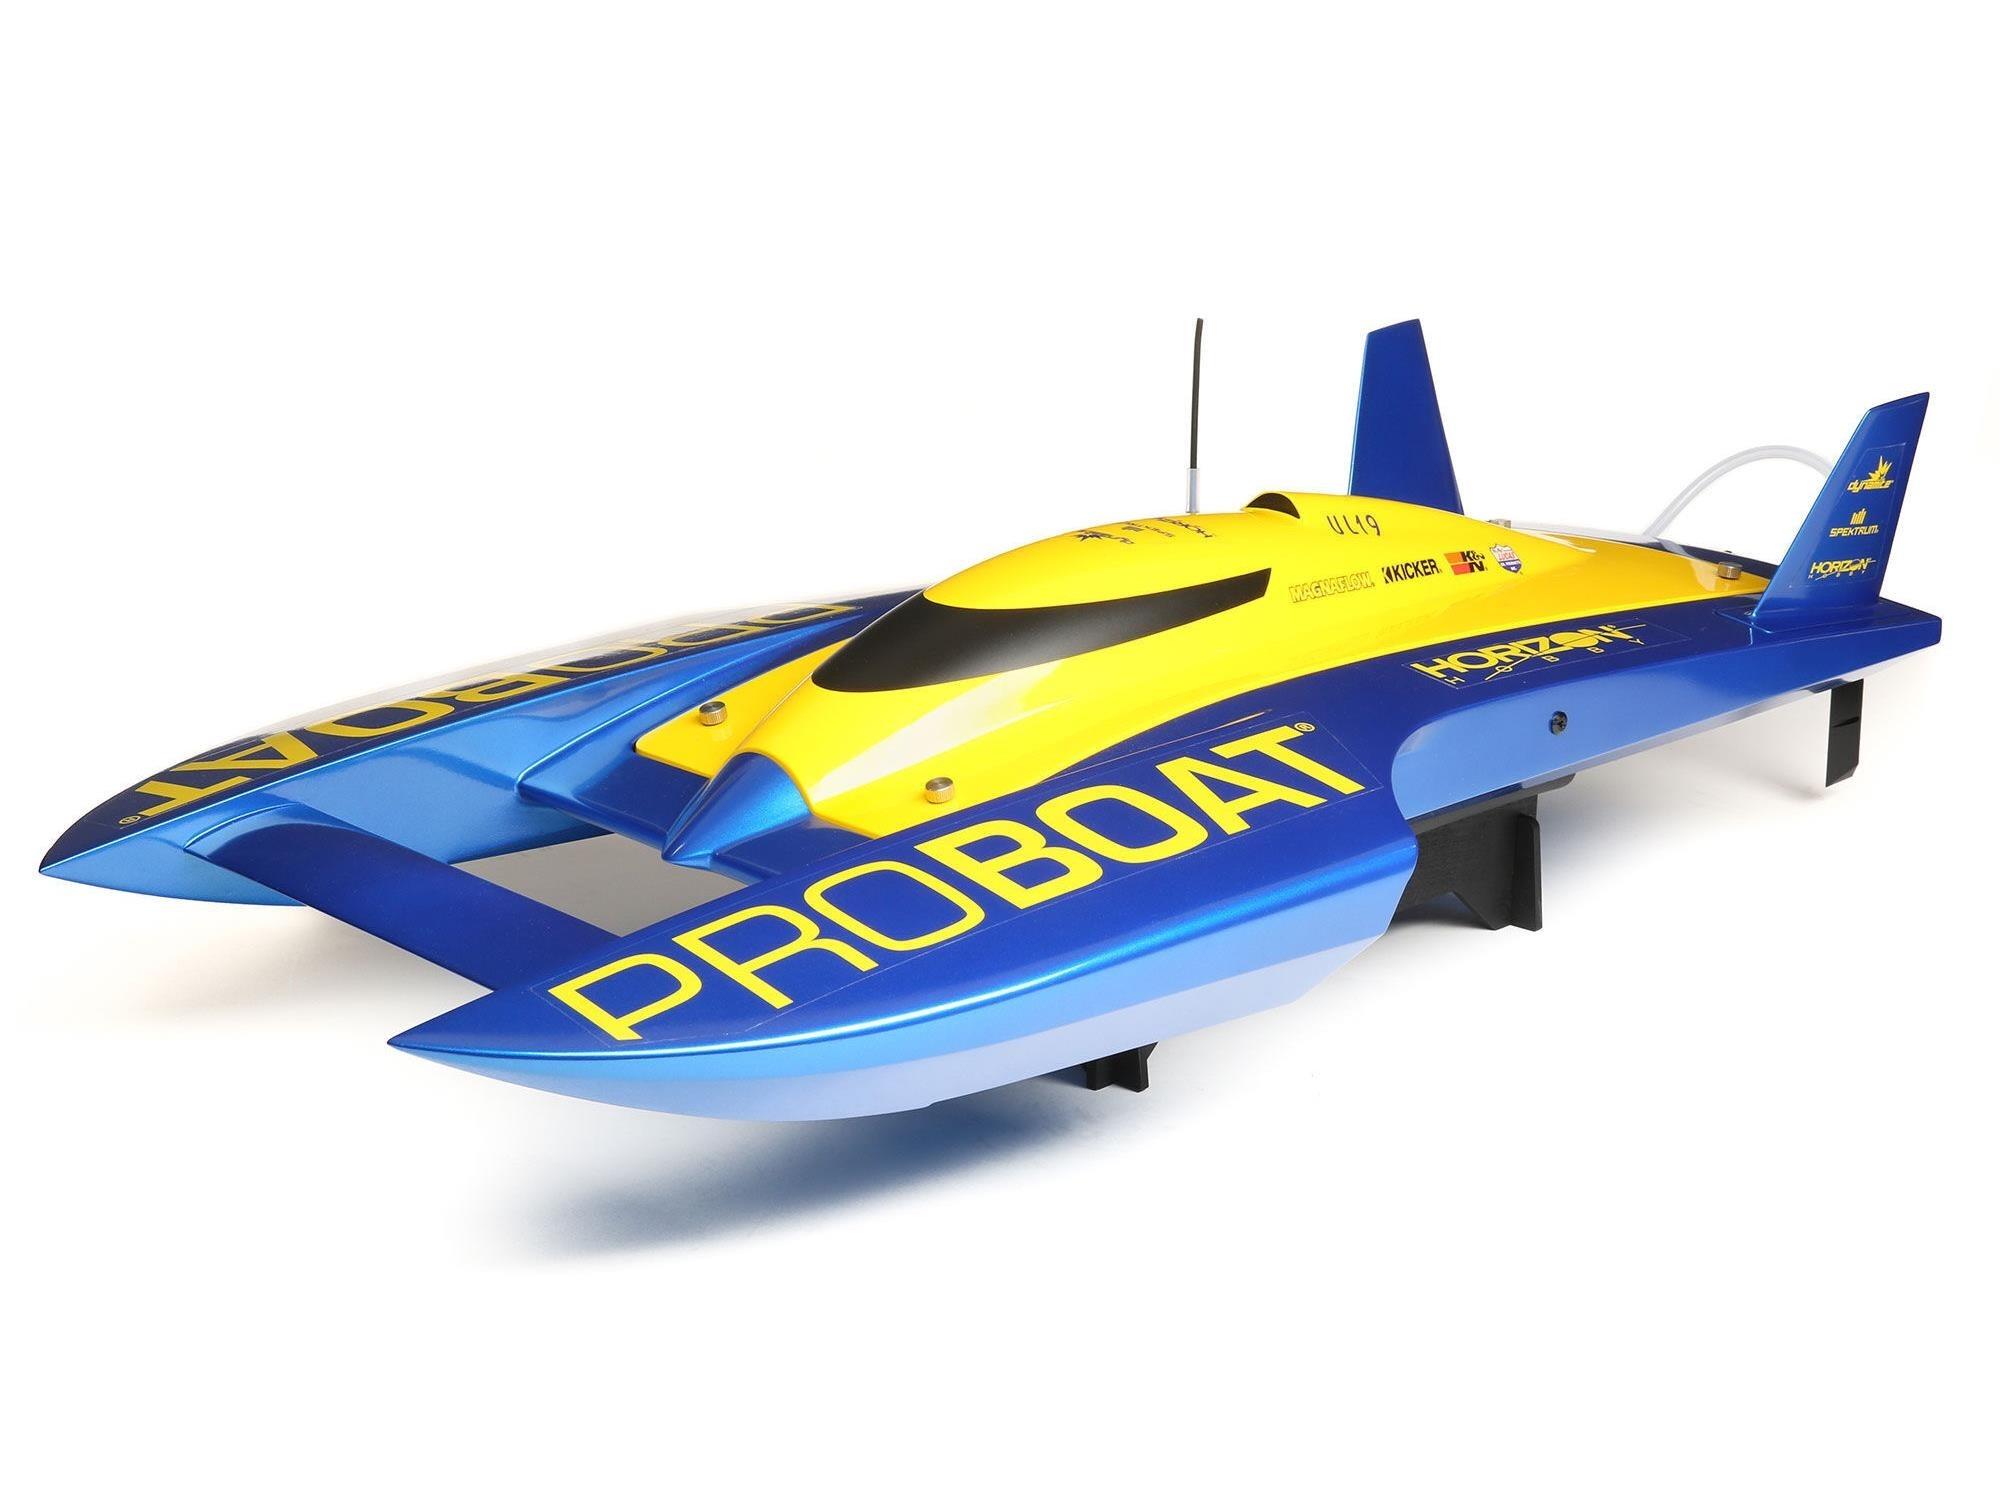 1/6 Scale Rc Hydroplane: Maintenance and Restrictions for Your 1/6 Scale RC Hydroplane